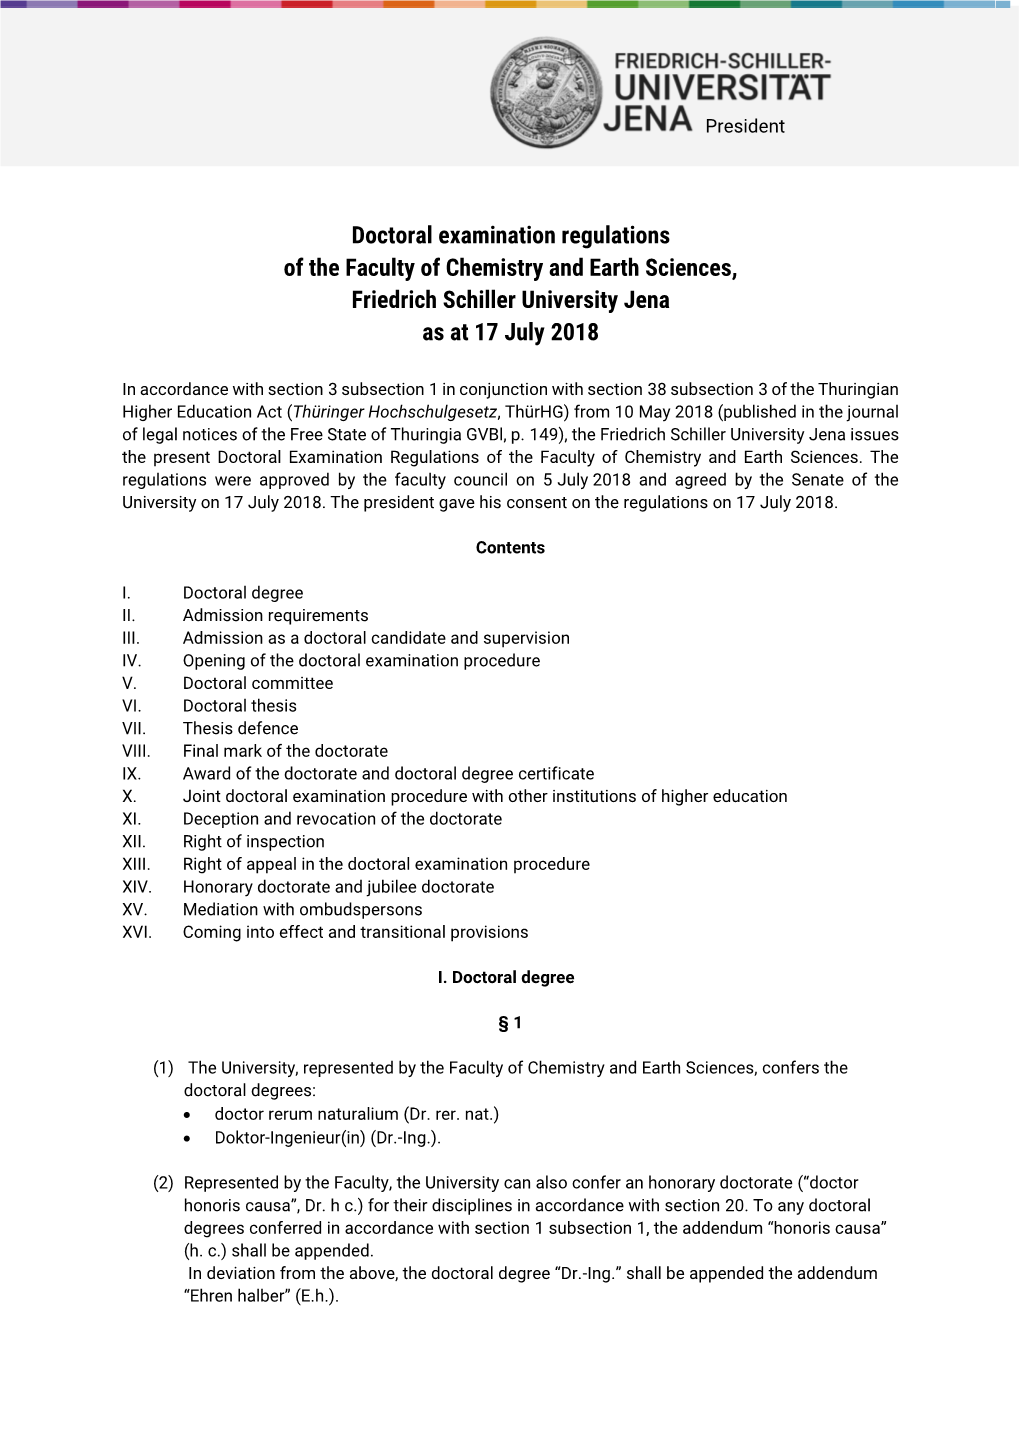 Doctoral Examination Regulations of the Faculty of Chemistry and Earth Sciences, Friedrich Schiller University Jena As at 17 July 2018